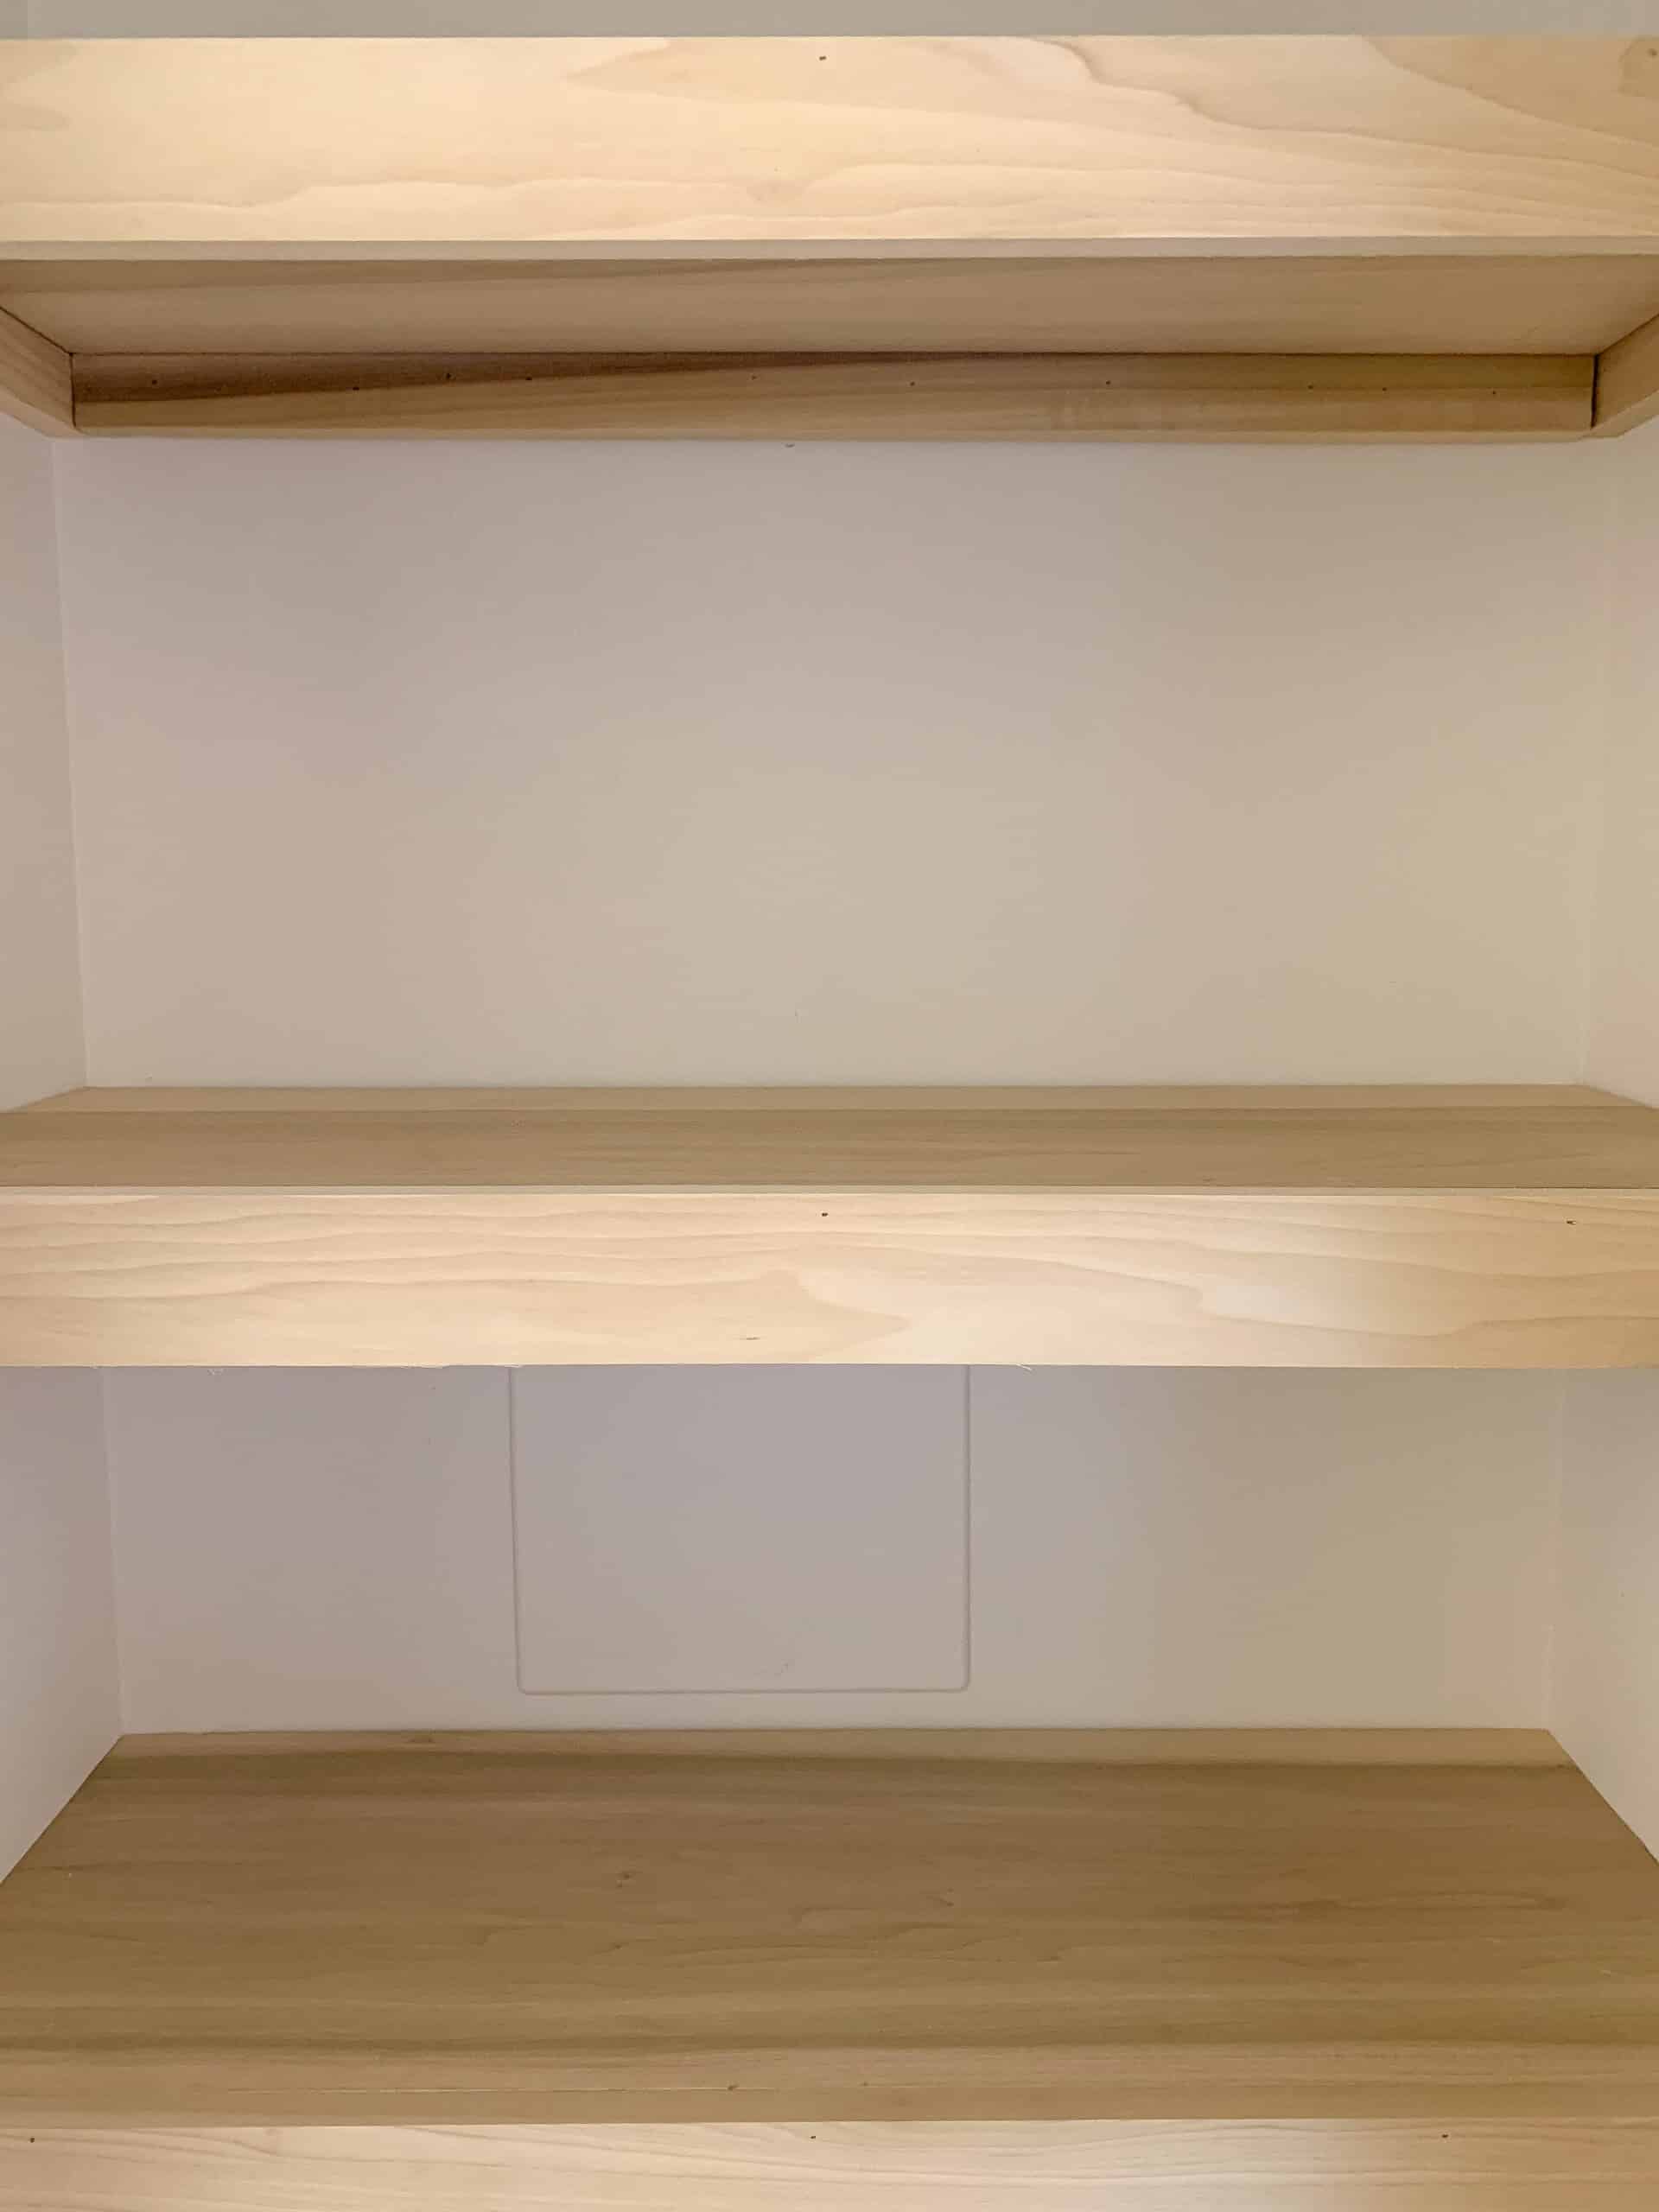 How to Build Plywood Shelves in a Closet